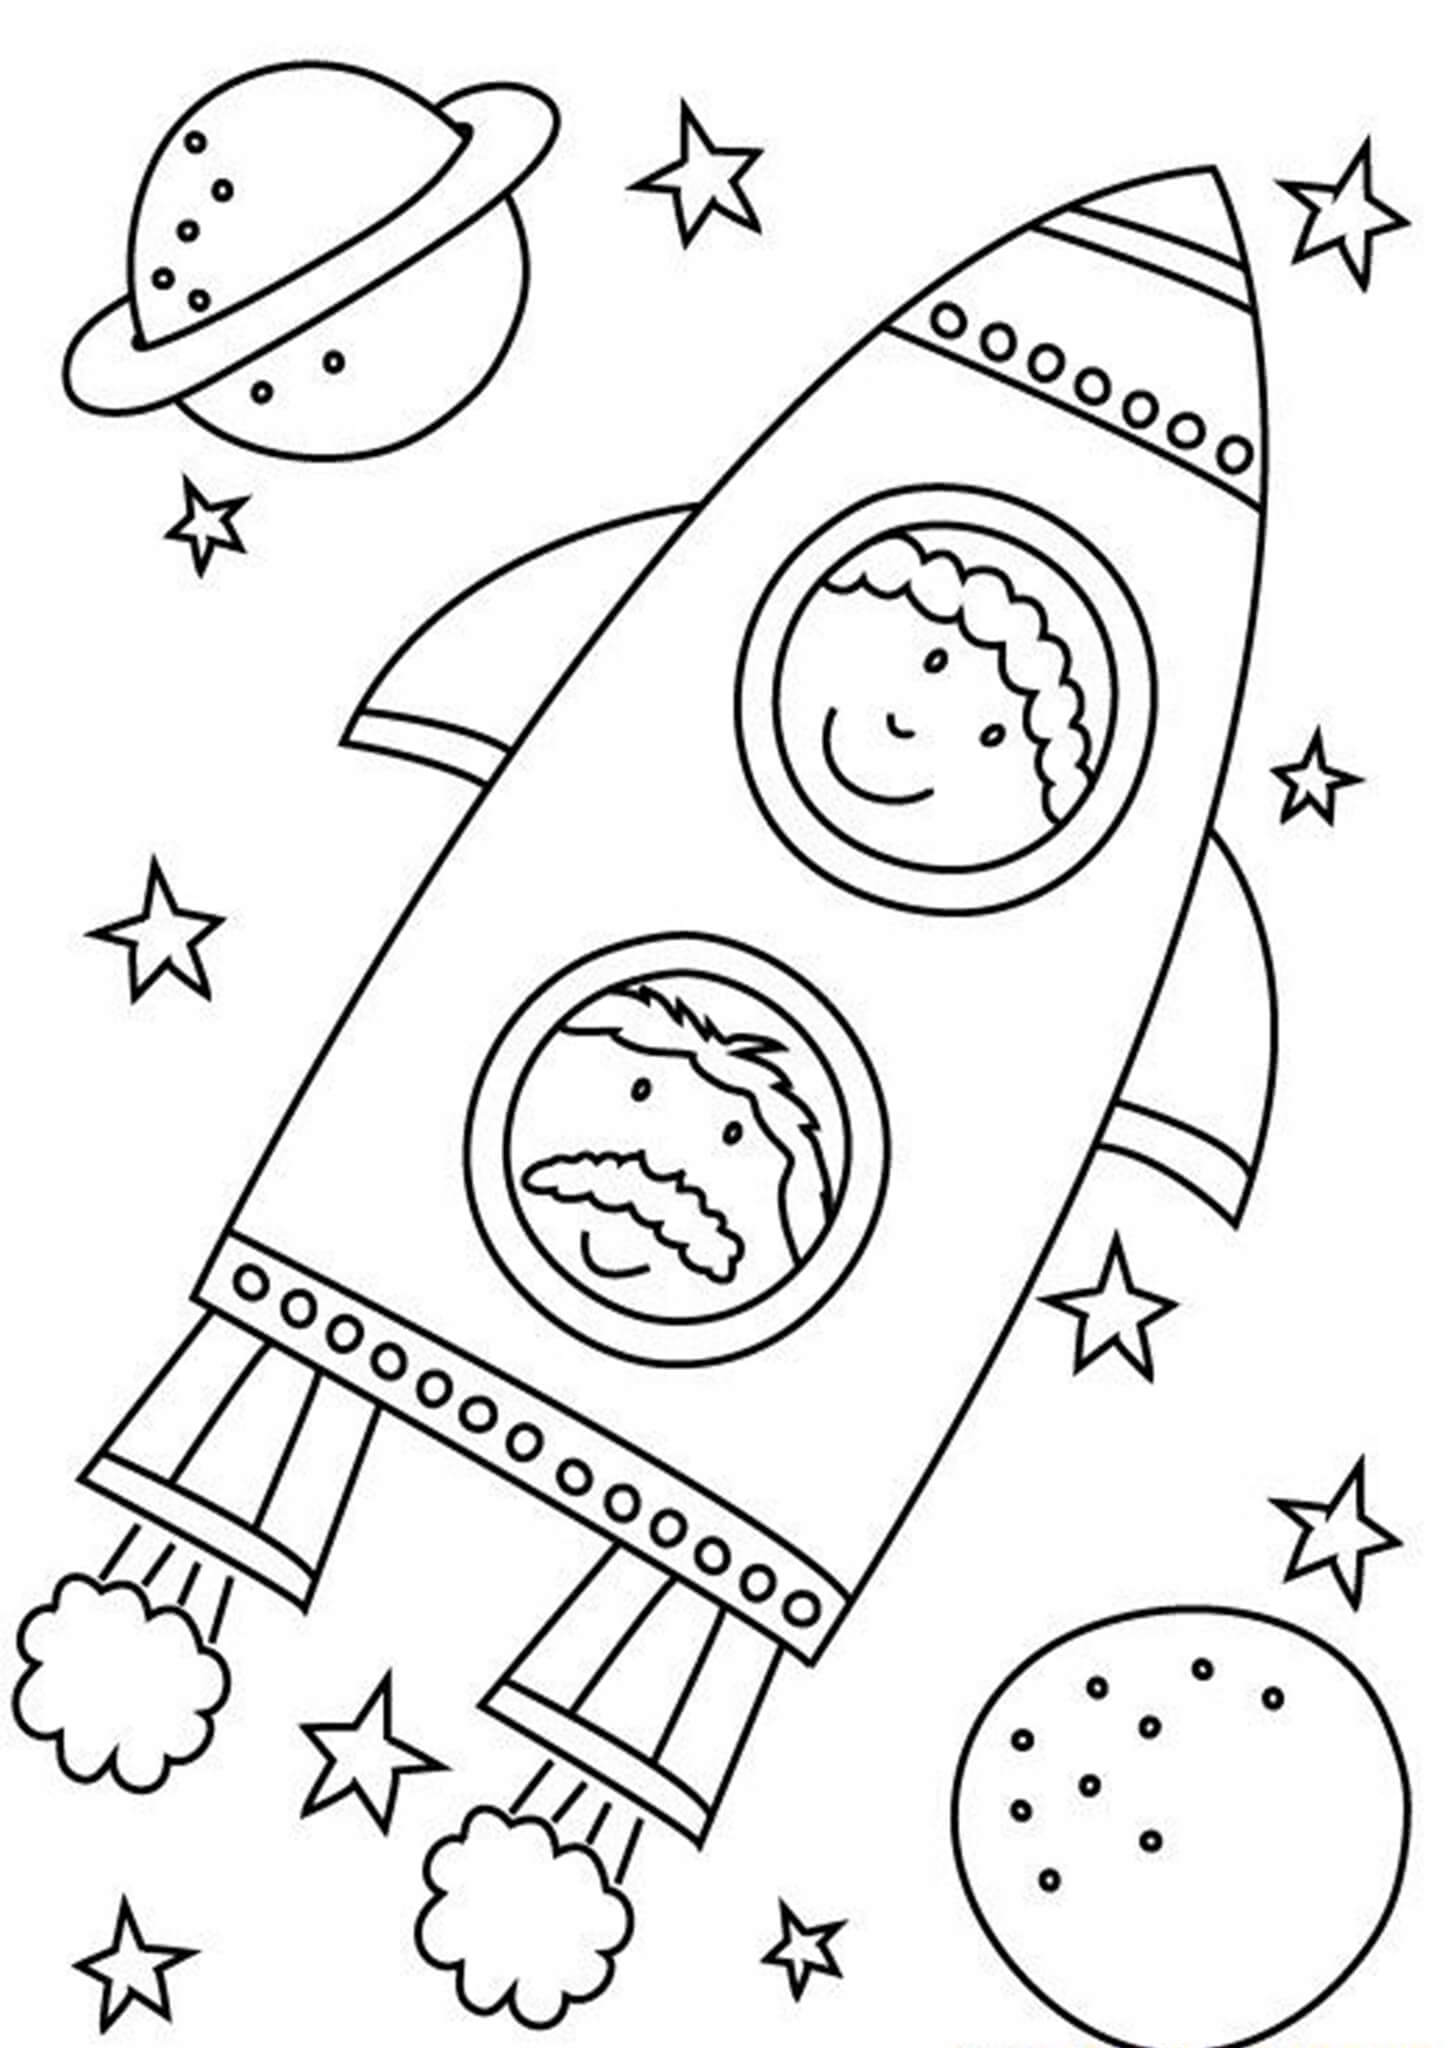 Free Printable Space Themed Coloring Pages